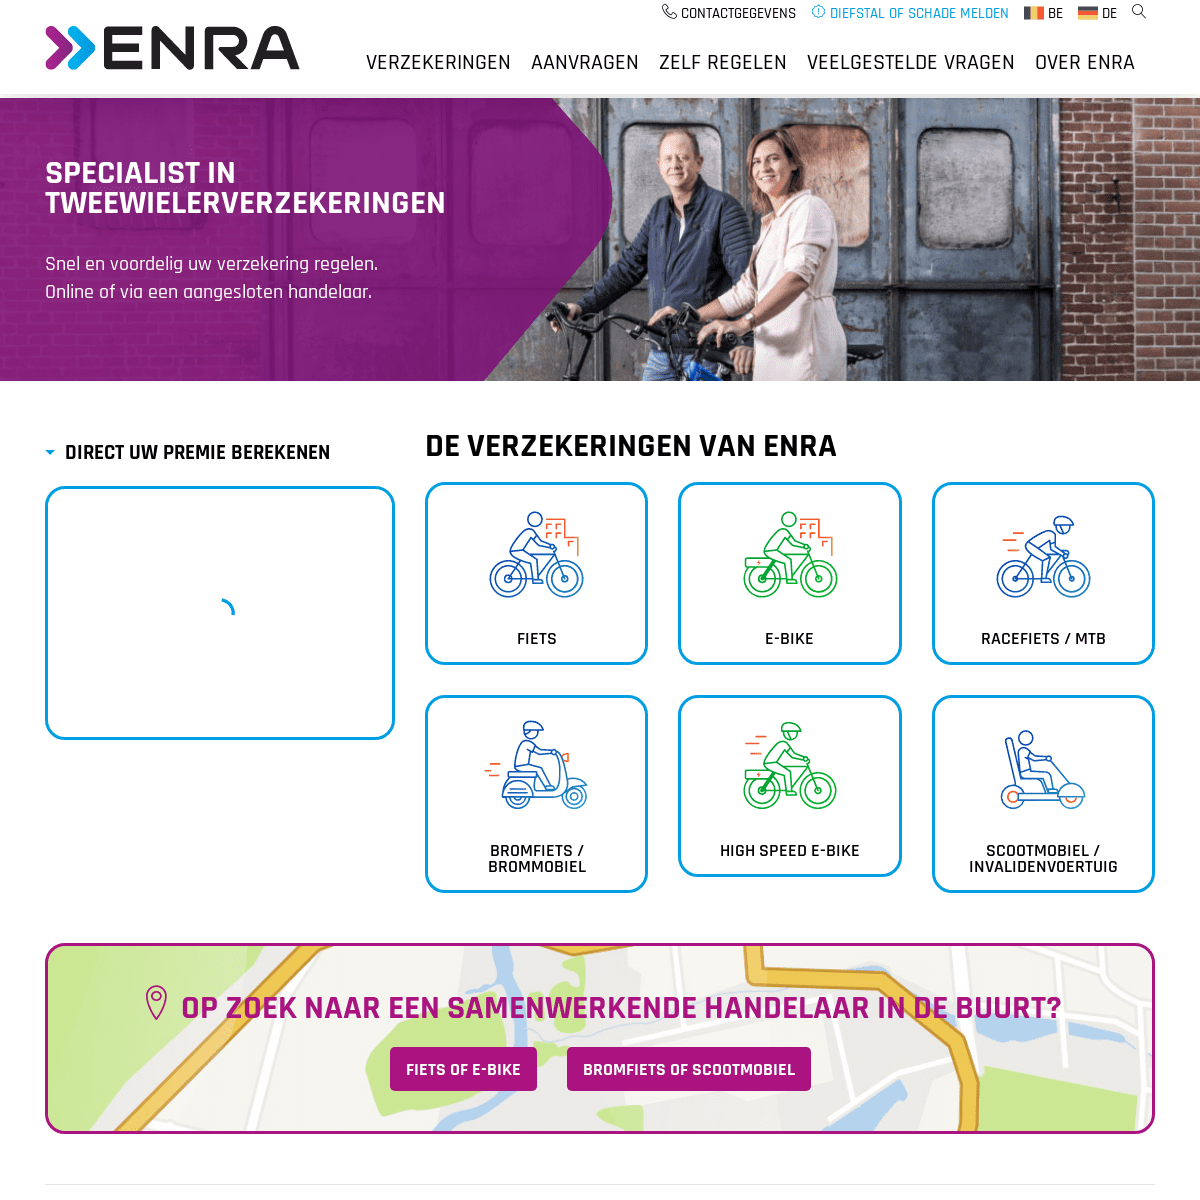 A complete backup of https://enra.nl